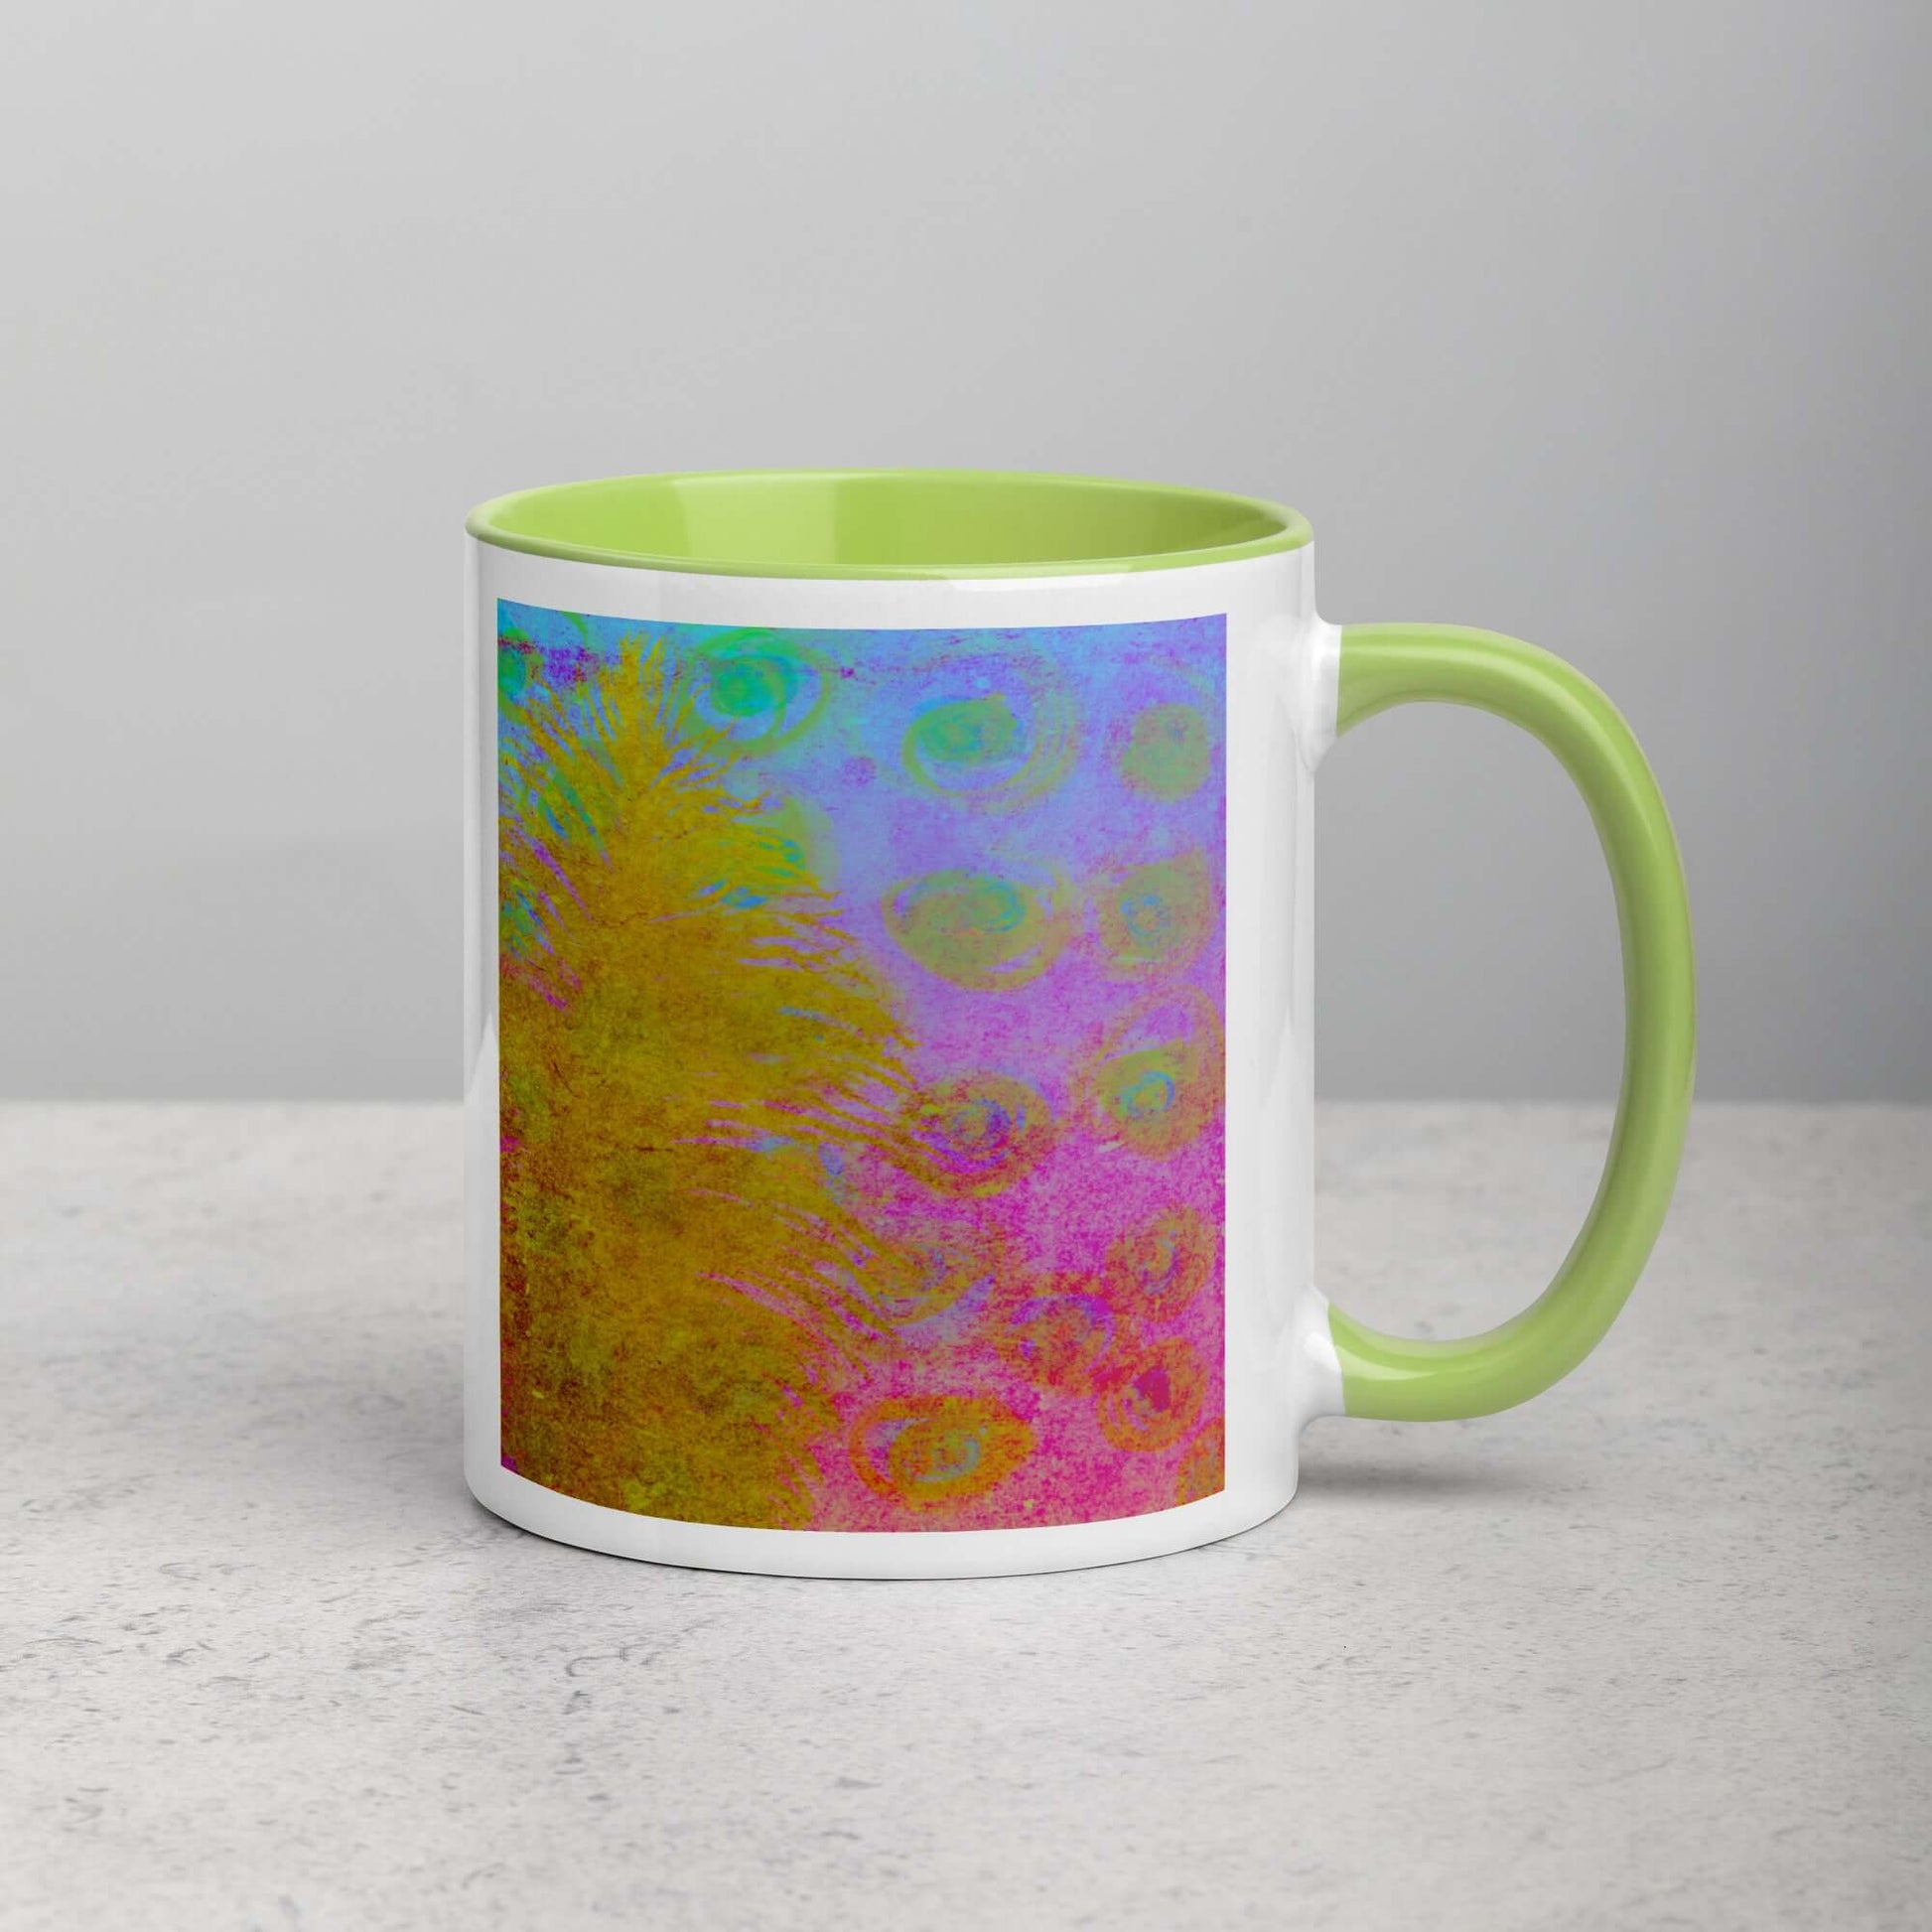 Golden Feather Pink and Blue “Fantasia” Abstract Art Mug with Lime Green Color Inside Right Handed Front View